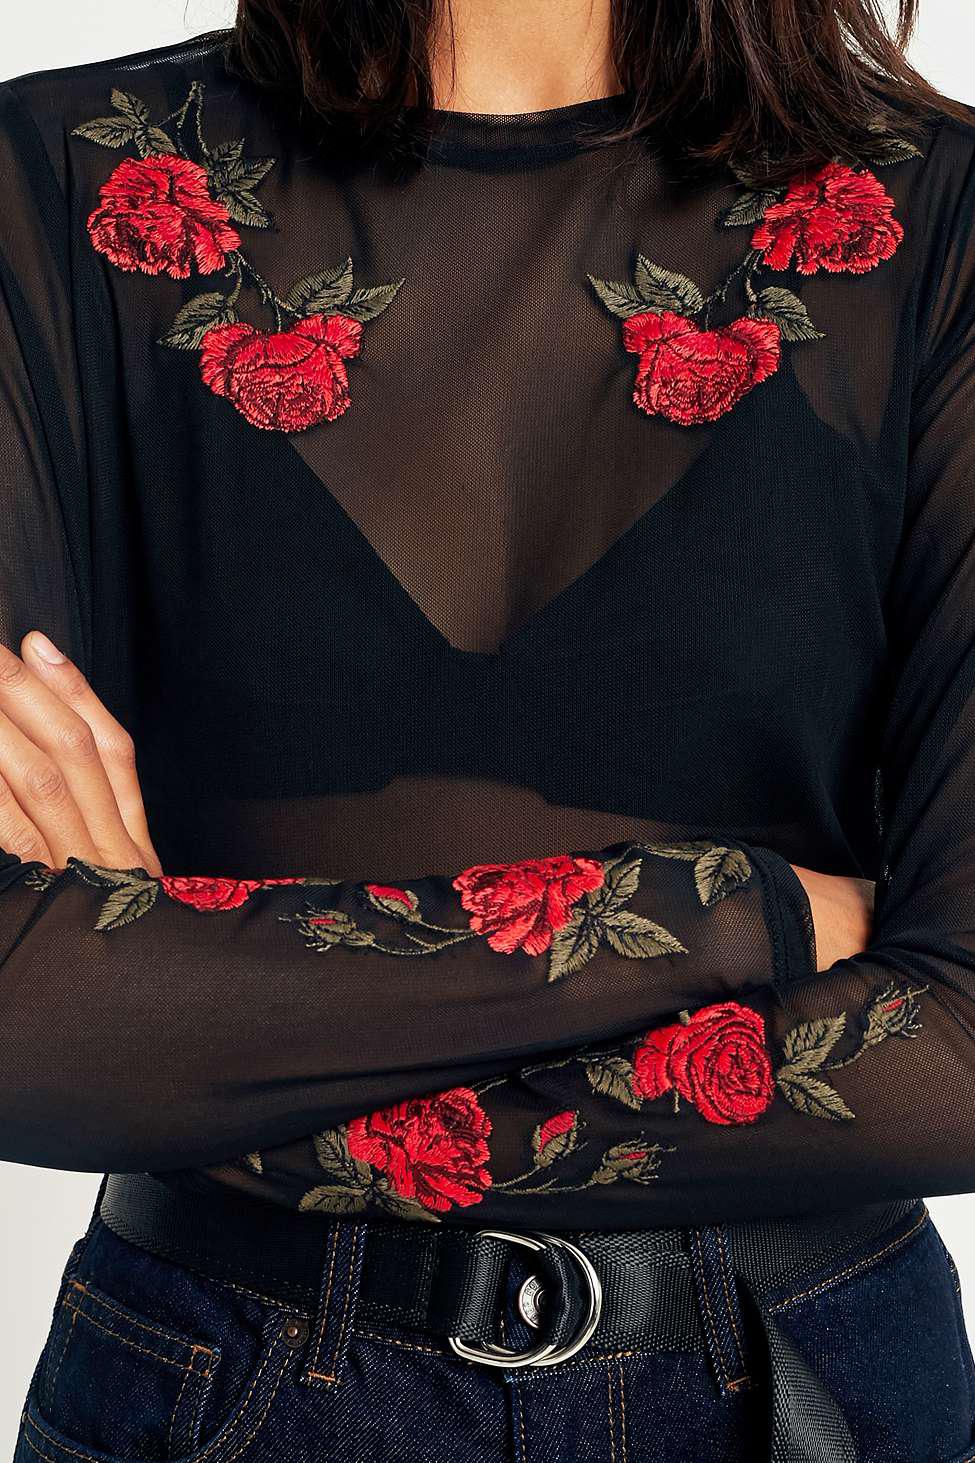 black mesh top with roses